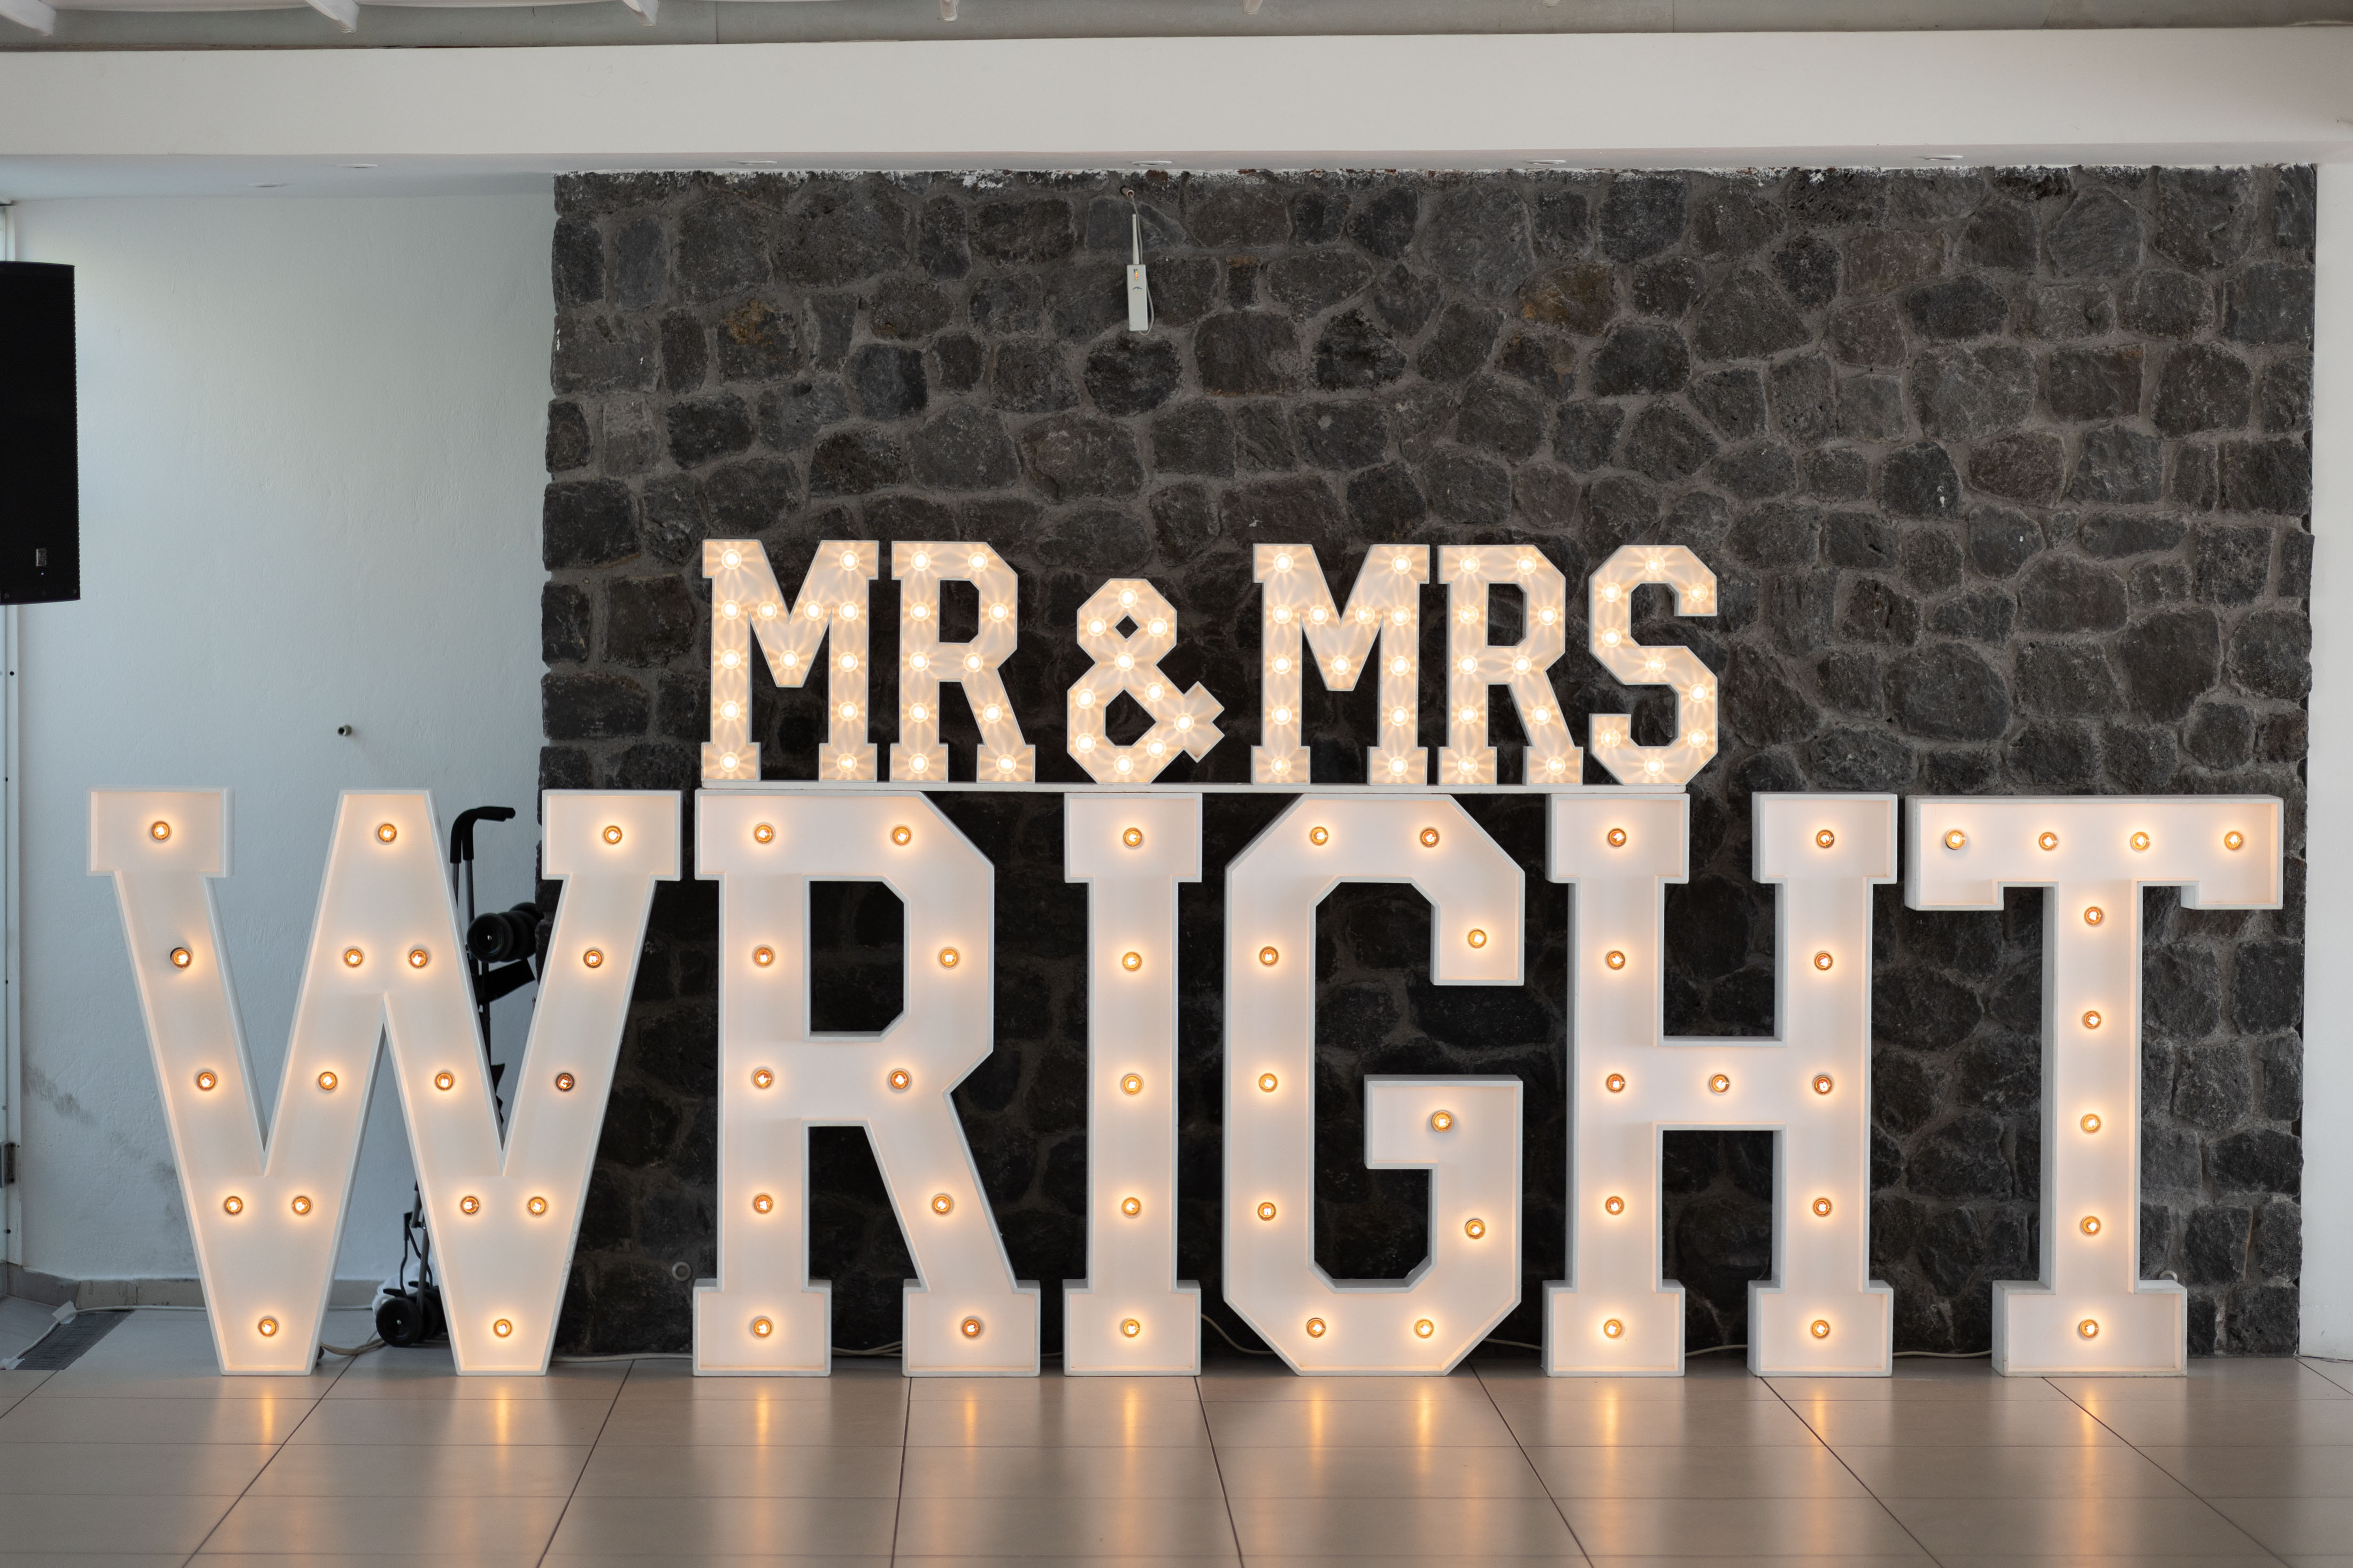 Light up Mr and Mrs Wright letters at Le Ciel Santorini wedding reception